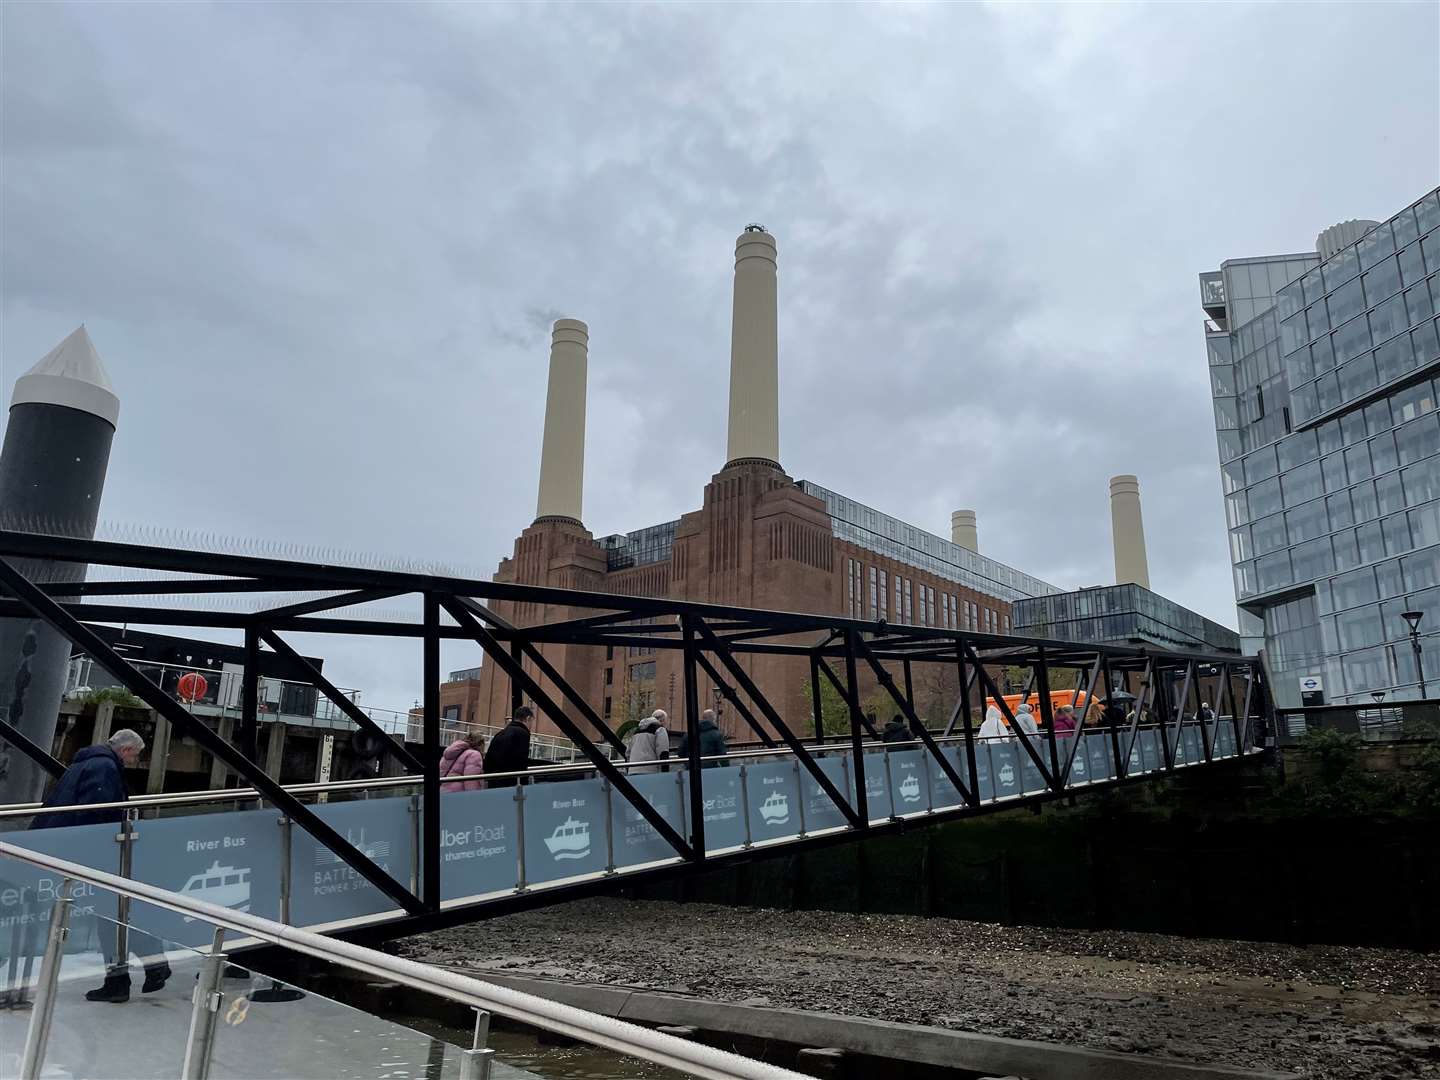 We decided to continue on to Battersea Power Station